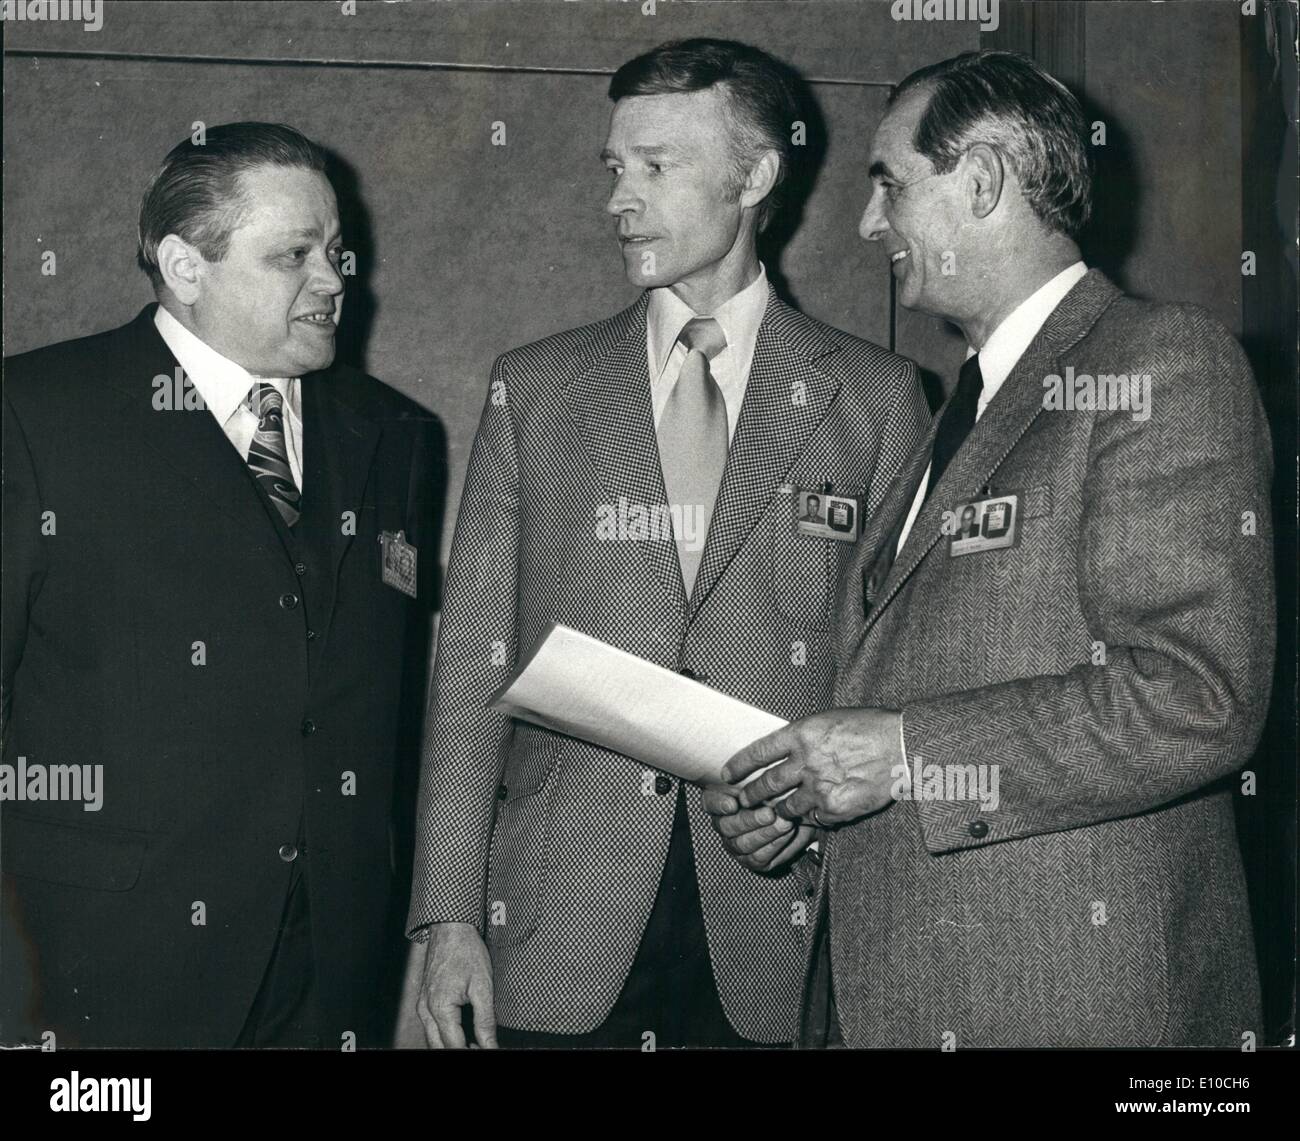 Apr. 04, 1972 - International Security Exhibition and Conference: Security experts from both sides of the Atlantic are attending the International Security Exhibition and Conference, which opened today at the Royal Lancaster Hotel, London. Photo shows pictured at the conference today are (L to R) Ernst Keller, Principal Superintendent and head of the crime prevention department at the Landes Kriminalamt Rheinland-Platz, Knoblenz West Germany, CR Gian, Cheif of police Oakland Police Department, California and Capt Frans Mulders, Cheir of the Police district Hertogenbosch (Detective Branch), Stock Photo